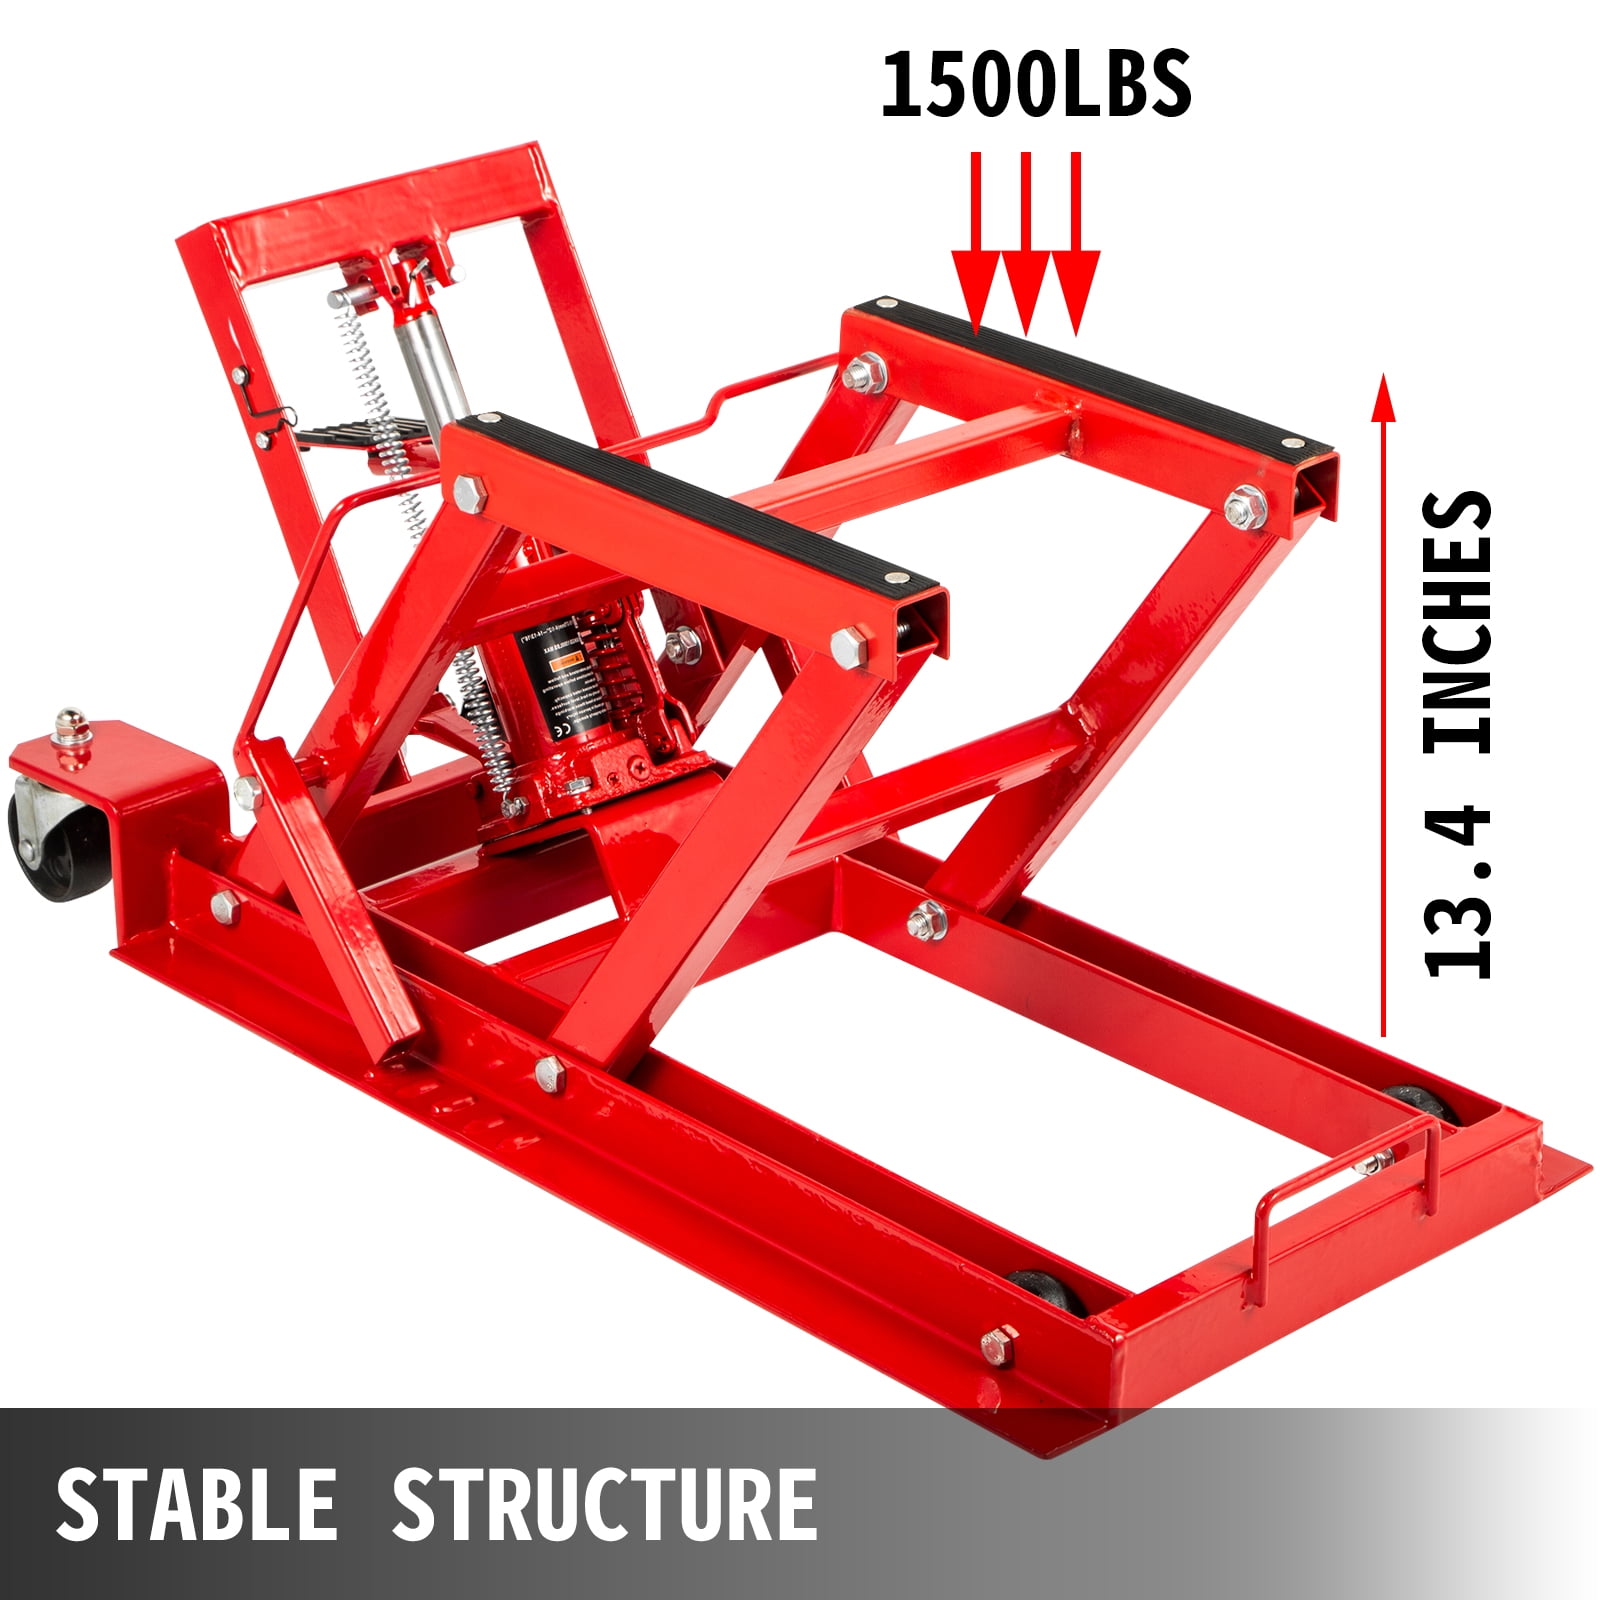 498.95 kg Motorcycle Scissor Lift Jack with Wide Deck Compact Crank Hoist Stand,Scissor Stand for Motorcycles VEVOR Motorcycle Jack 1100 lb Motorcycle Lift Table with Non-Skid Rubber Pad 